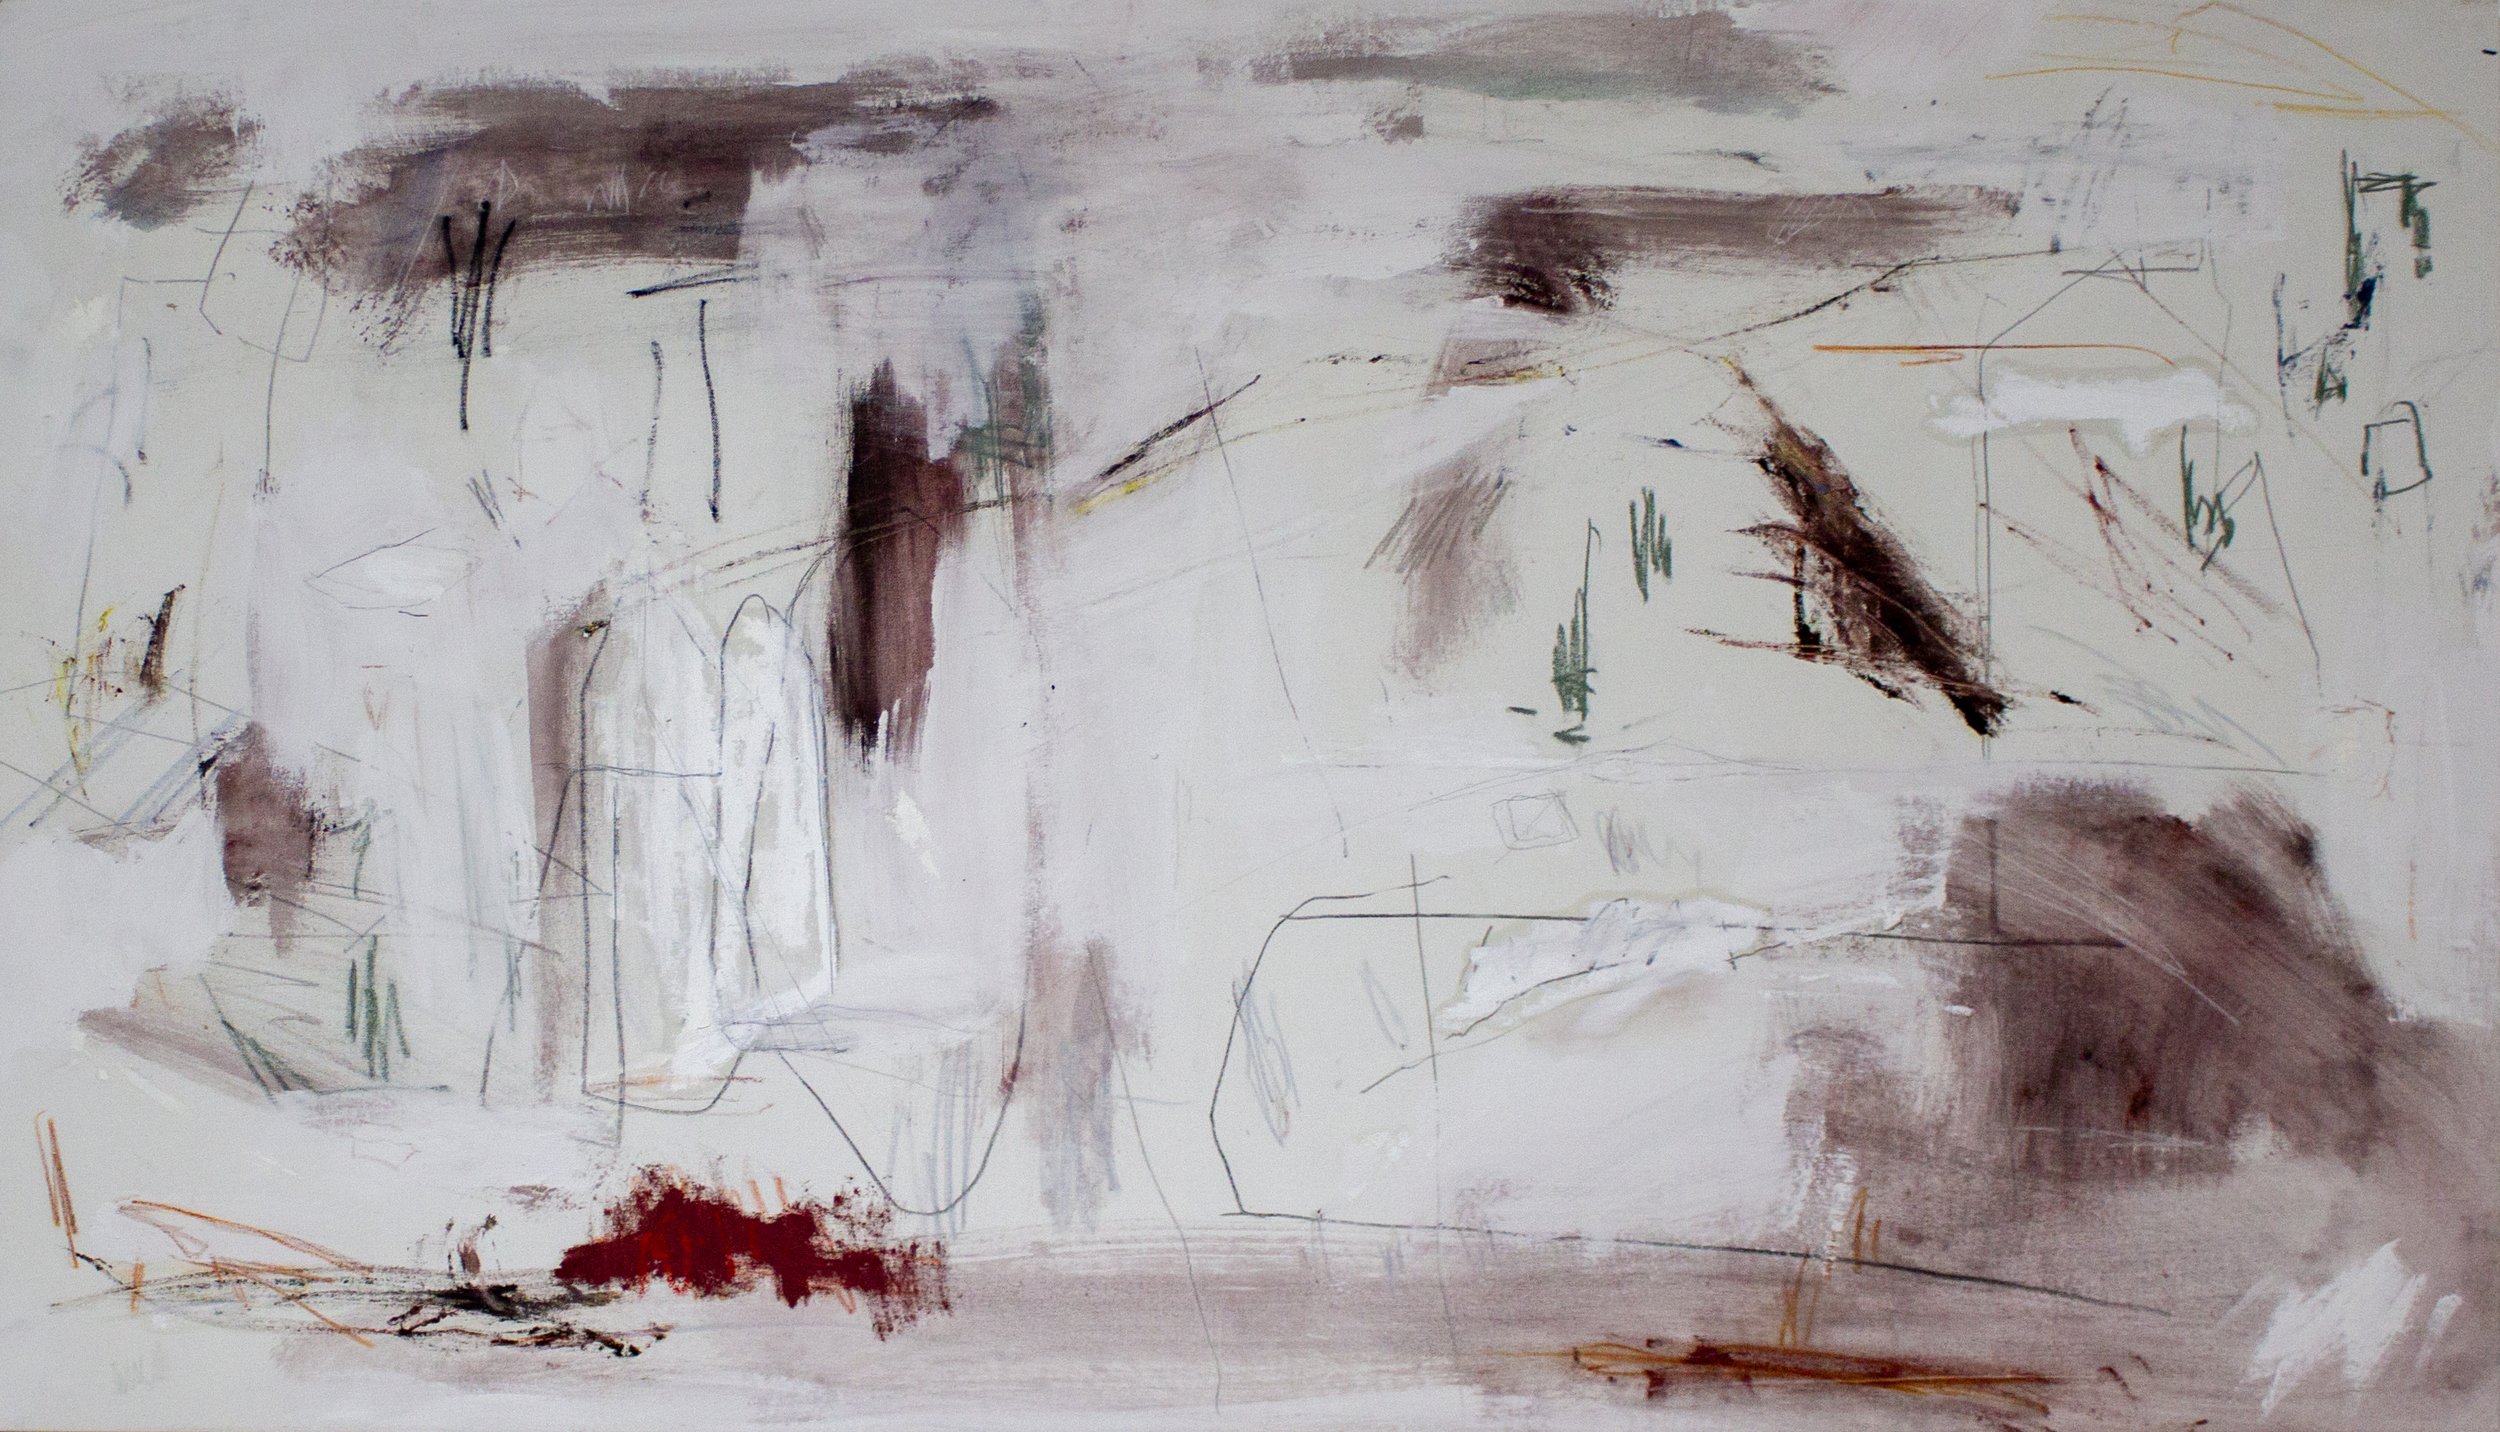   Anguish Revisited ,  2024  34 x 60 Inches  Oil, Acrylic, Crayon, Colored Pencil, Oil Stick, and Graphite on Canvas 